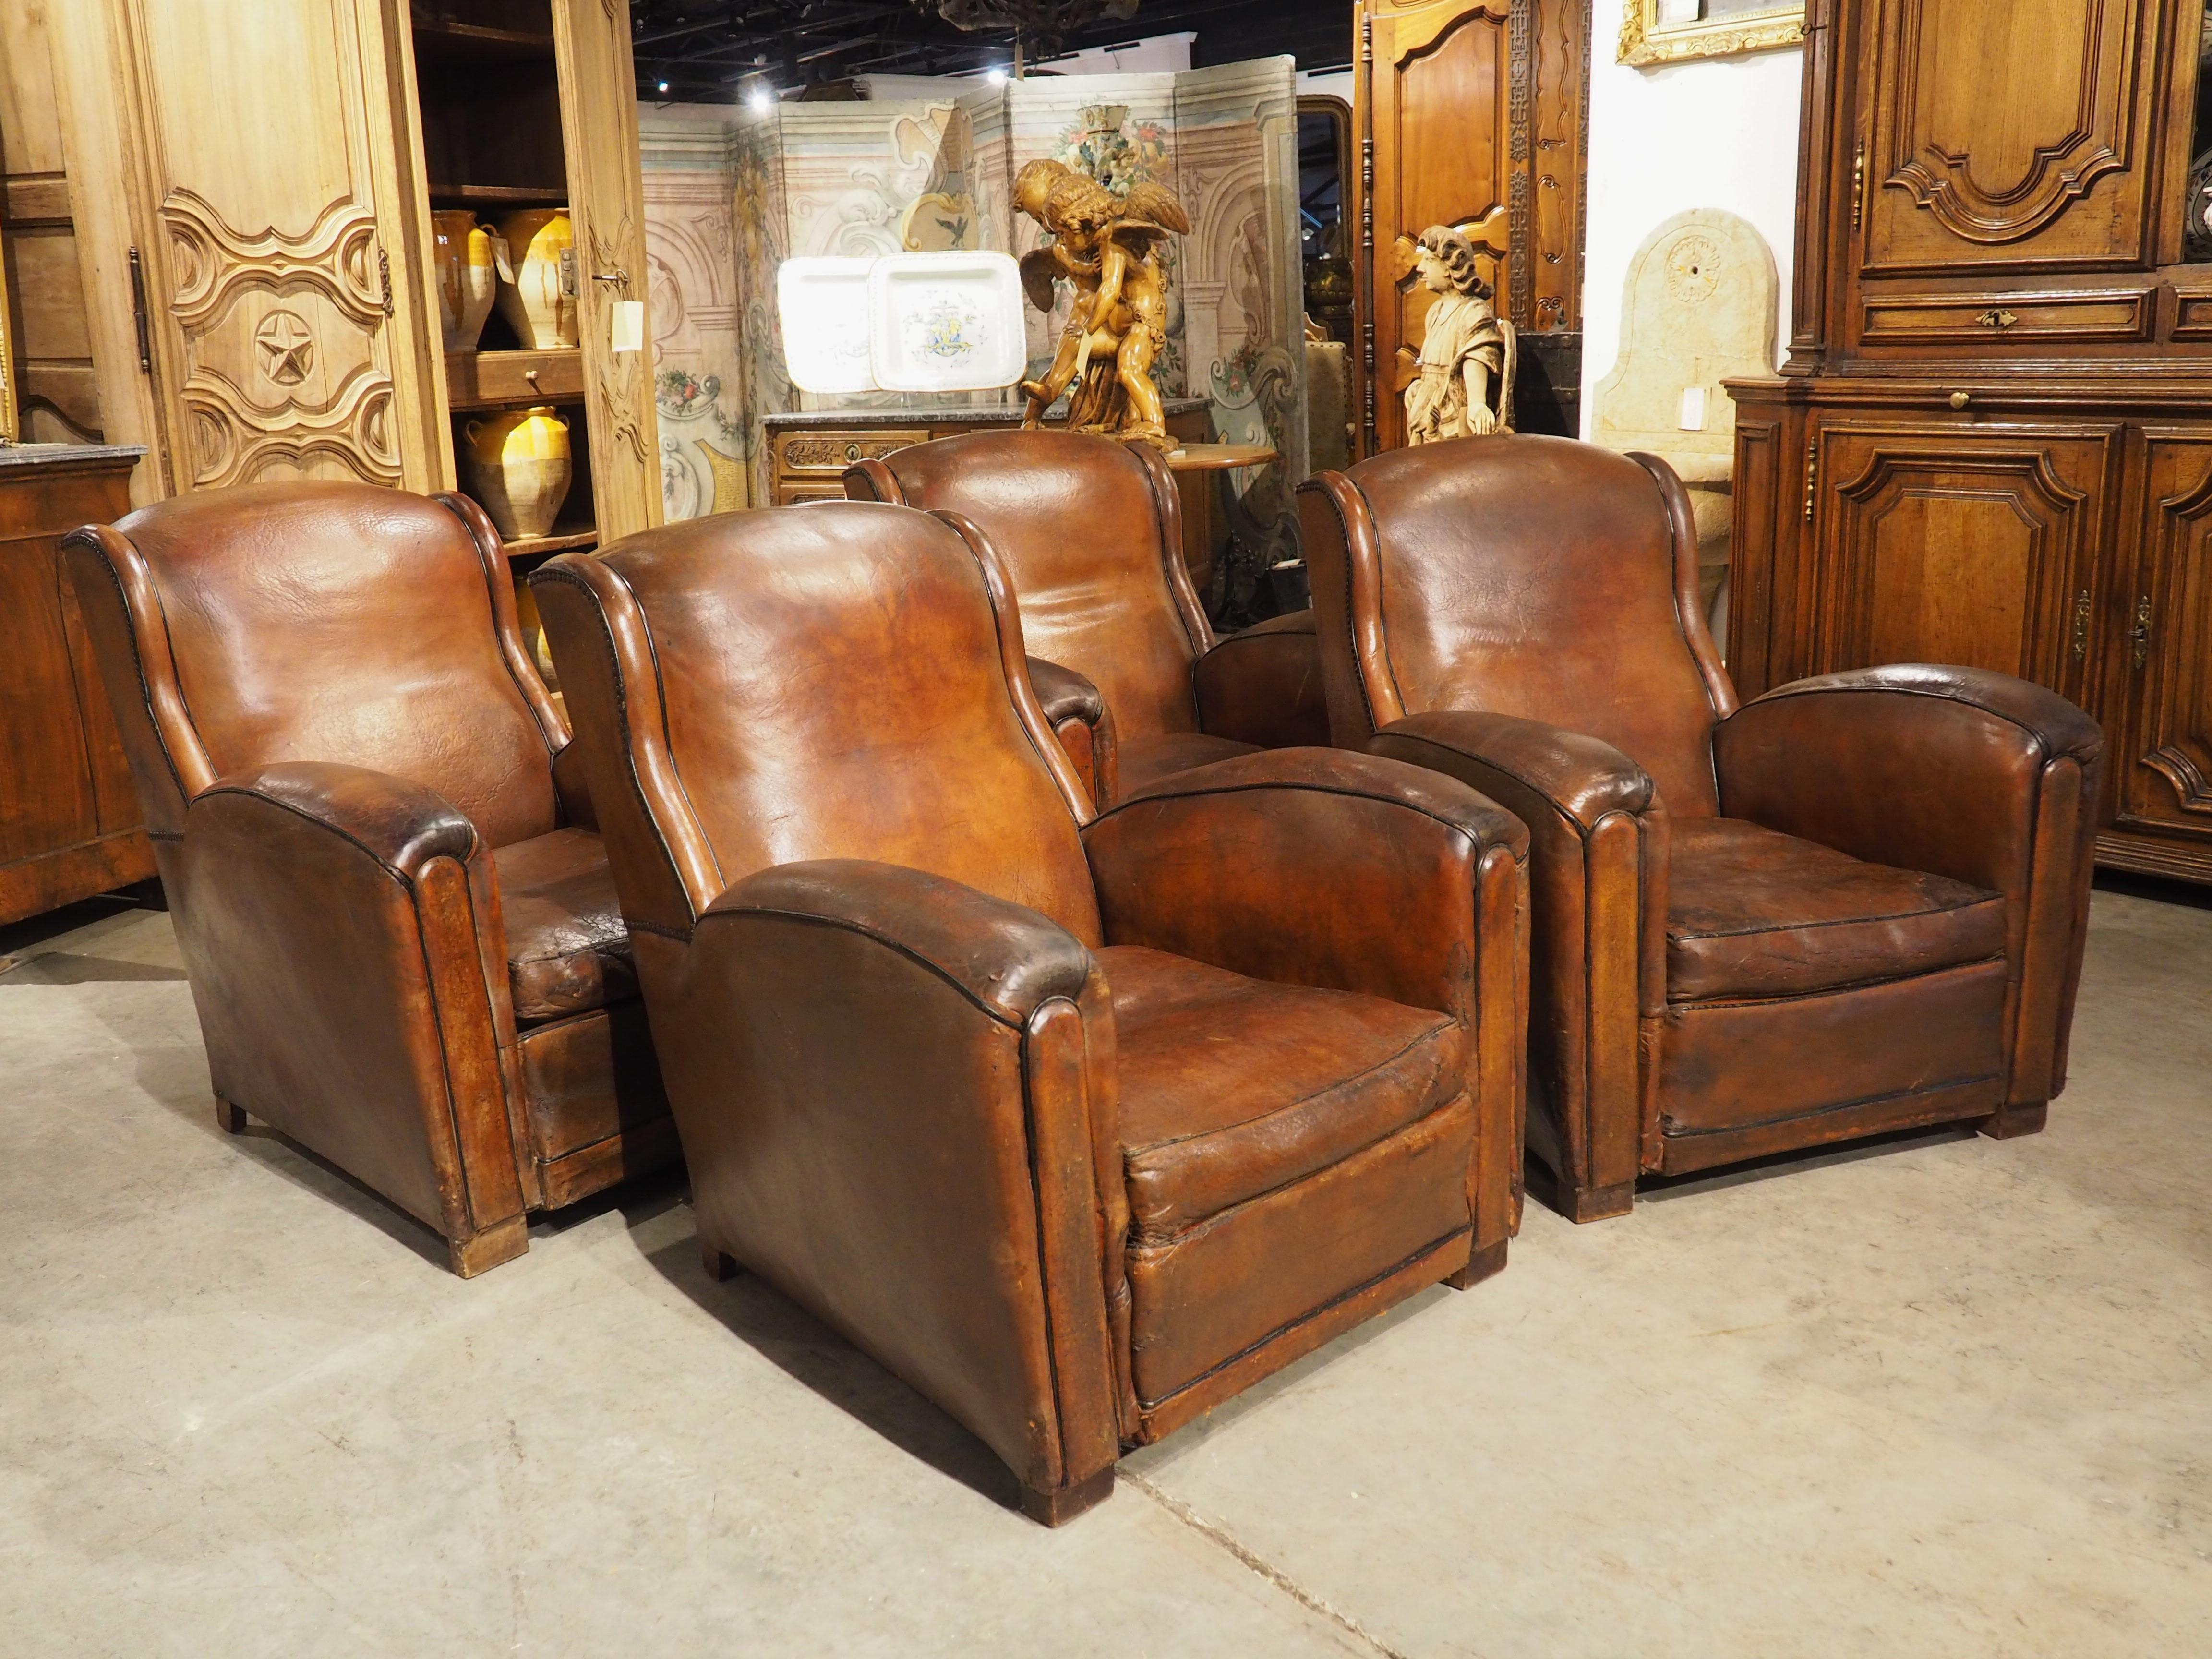 Furniture from the Art Deco period (1910s-early 1930s) was typically crafted using luxurious materials, such as the tanned leather seen on this set of four French club chairs. Hand-crafted around the 1920s, the chairs are perfect examples of Art